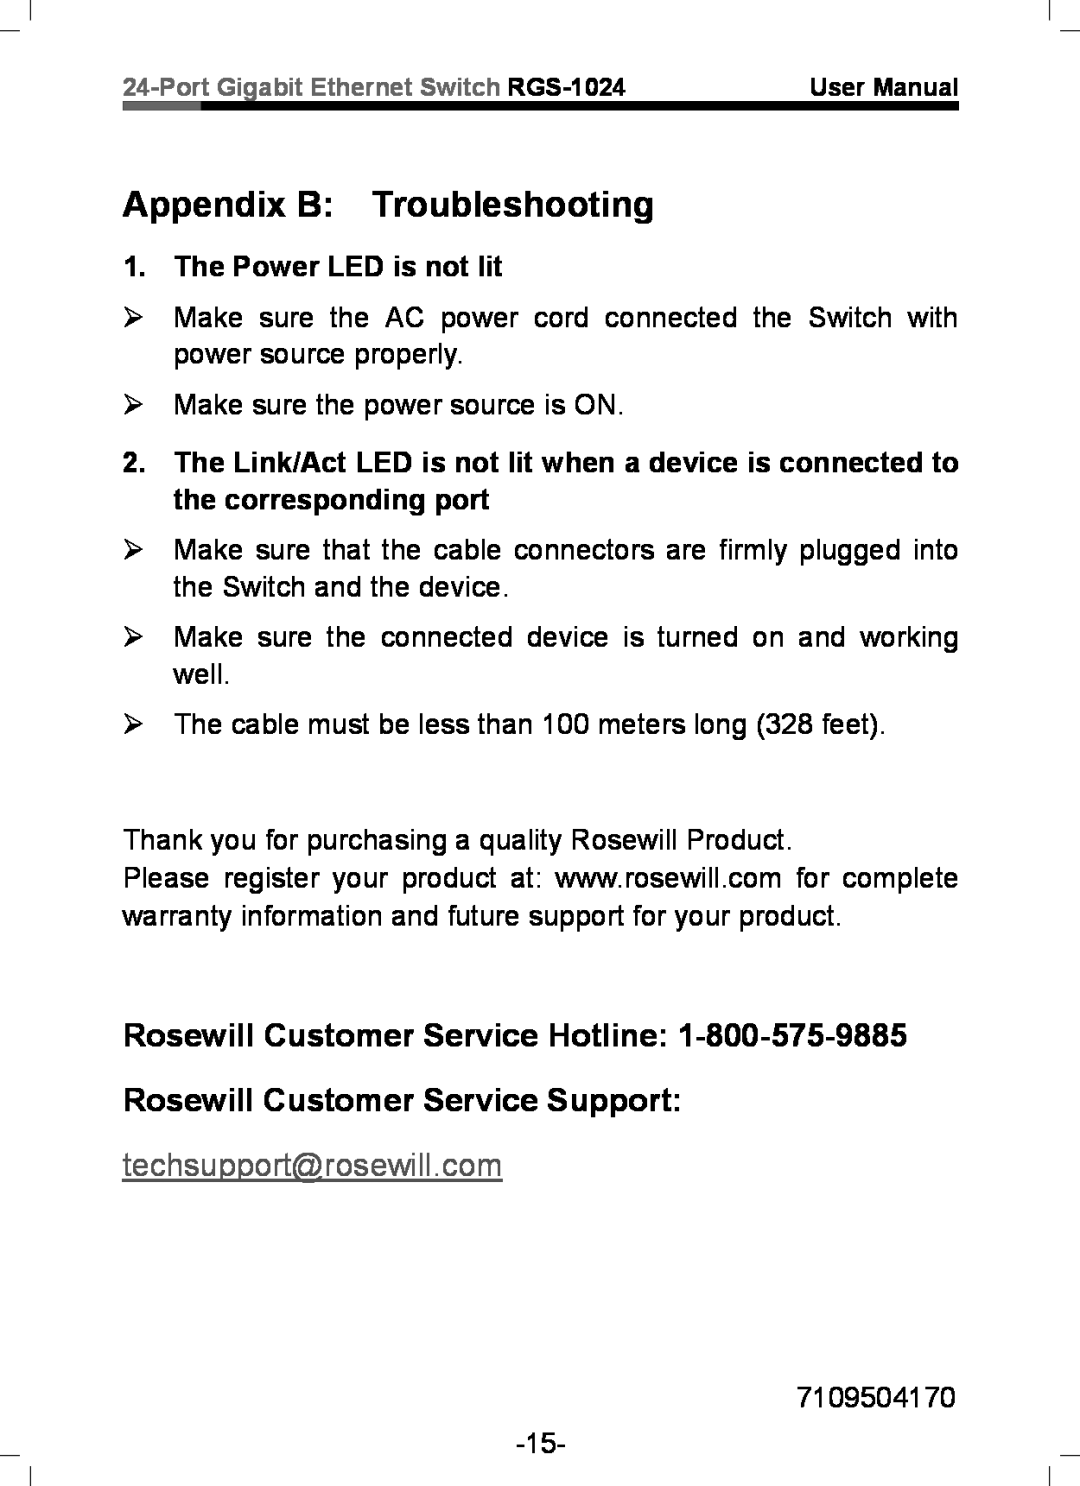 Rosewill RGS-1024 Appendix B Troubleshooting, Rosewill Customer Service Hotline Rosewill Customer Service Support 